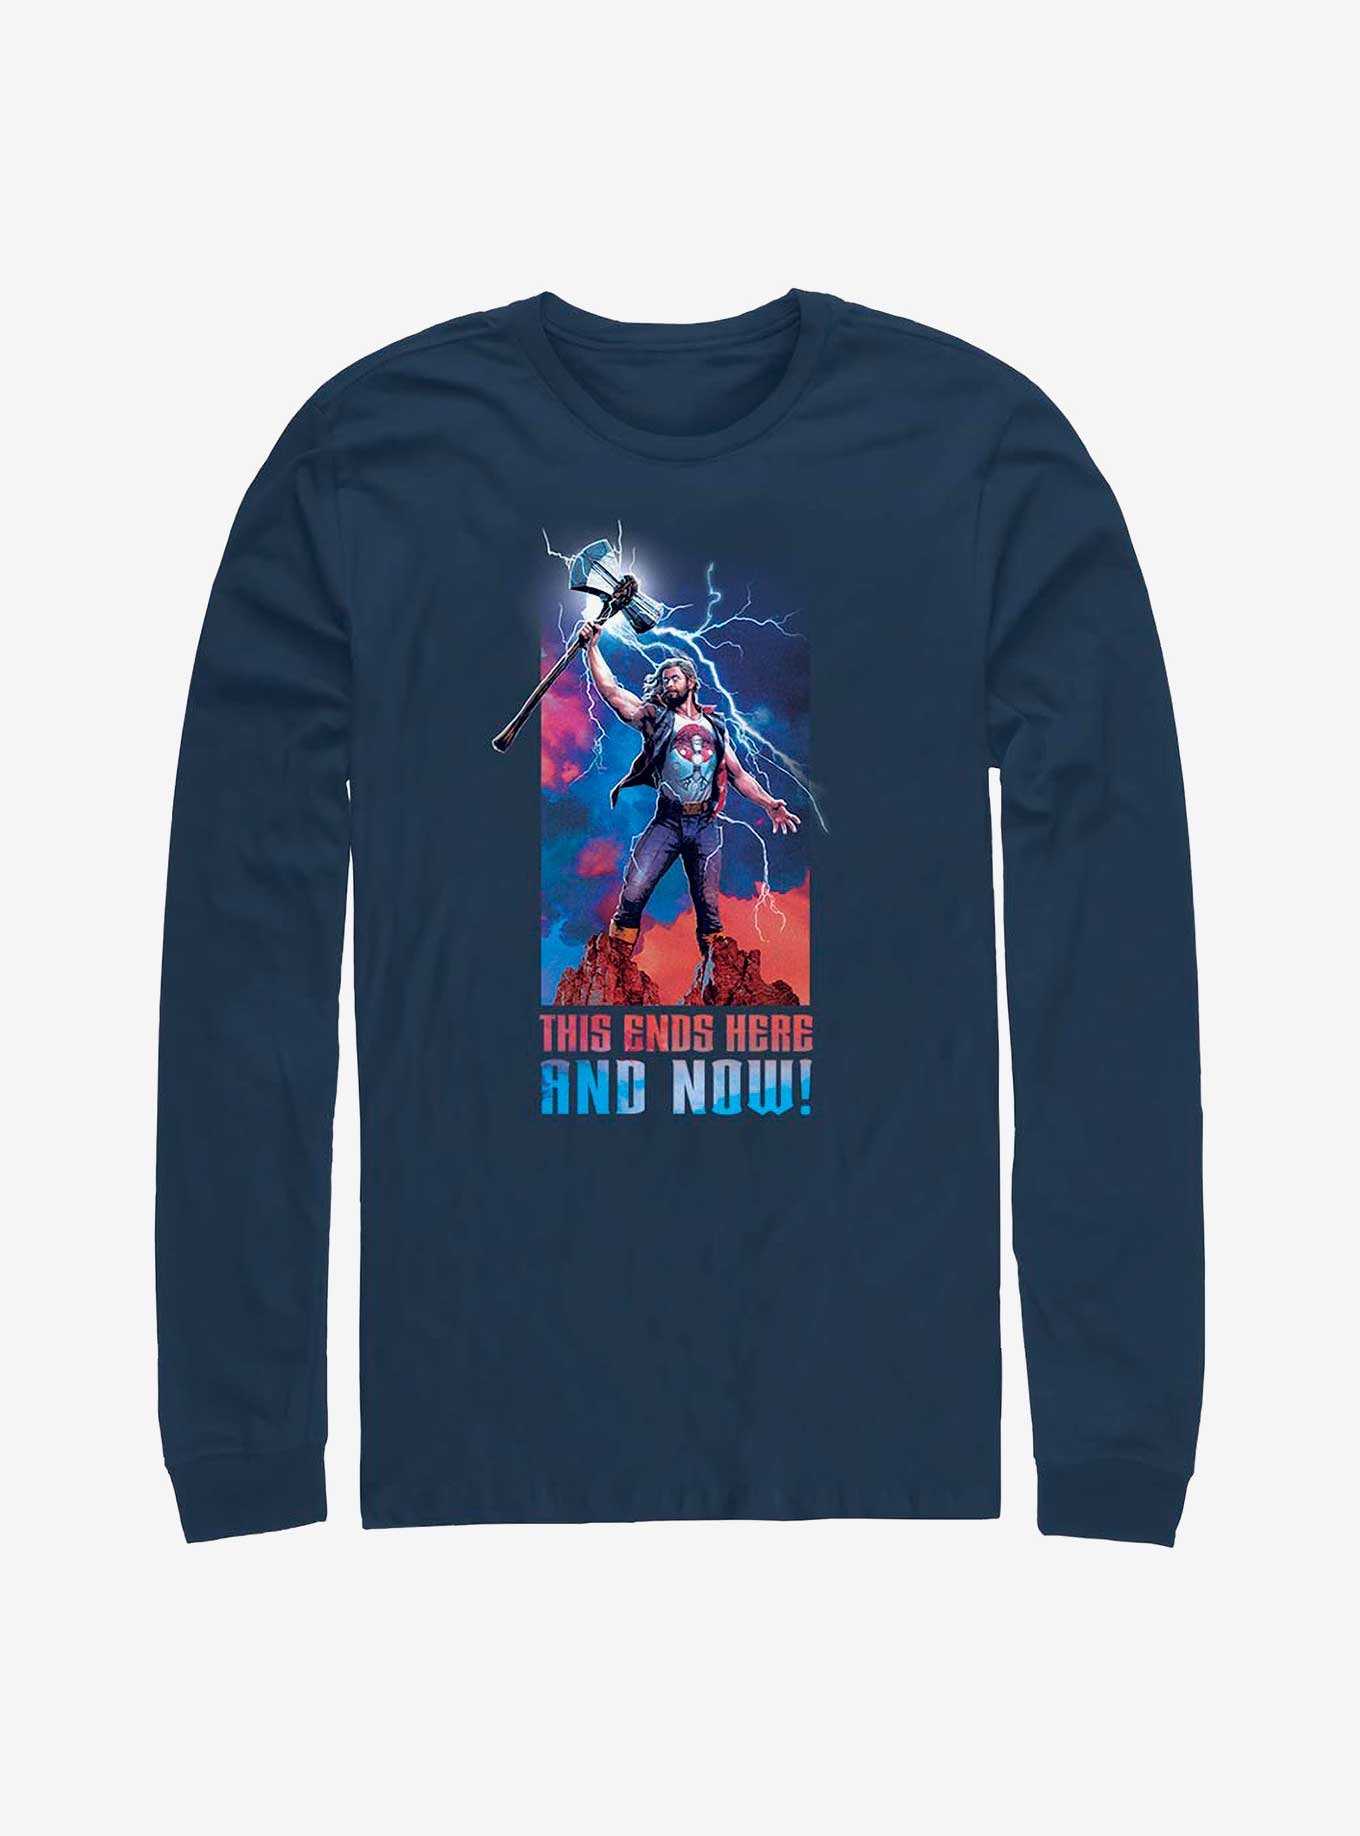 Marvel Thor: Love and Thunder Ends Here and Now Long-Sleeve T-Shirt, , hi-res